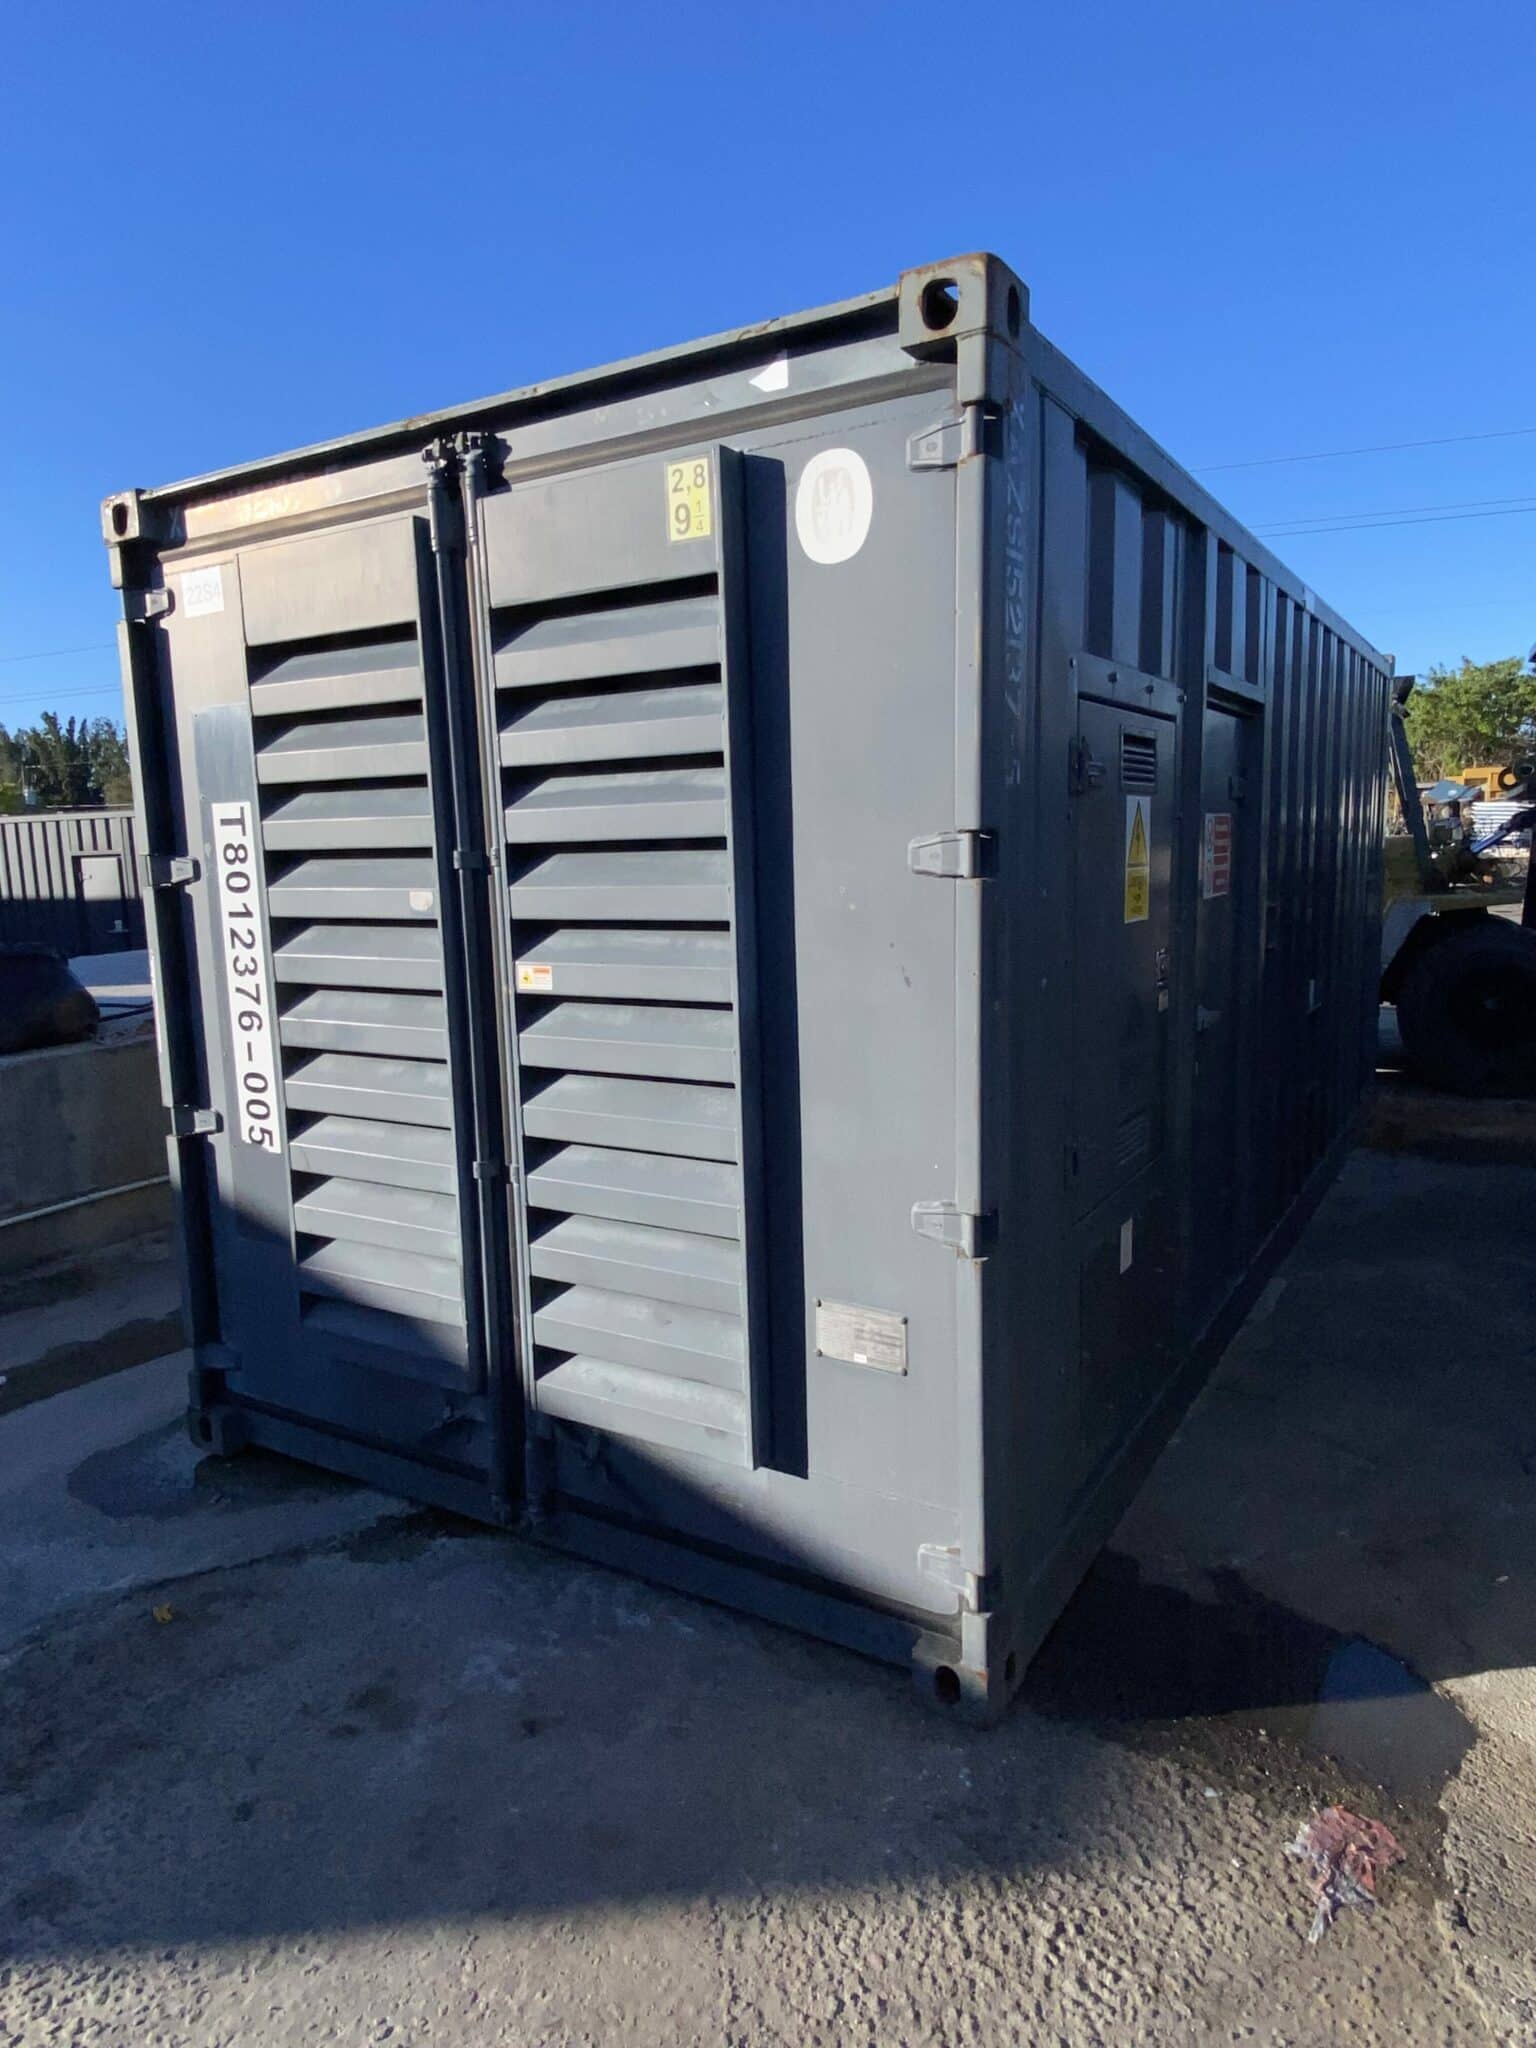 Used 1375 kW Cummins QSK60-G5 Natural Gas Generator – JUST IN!